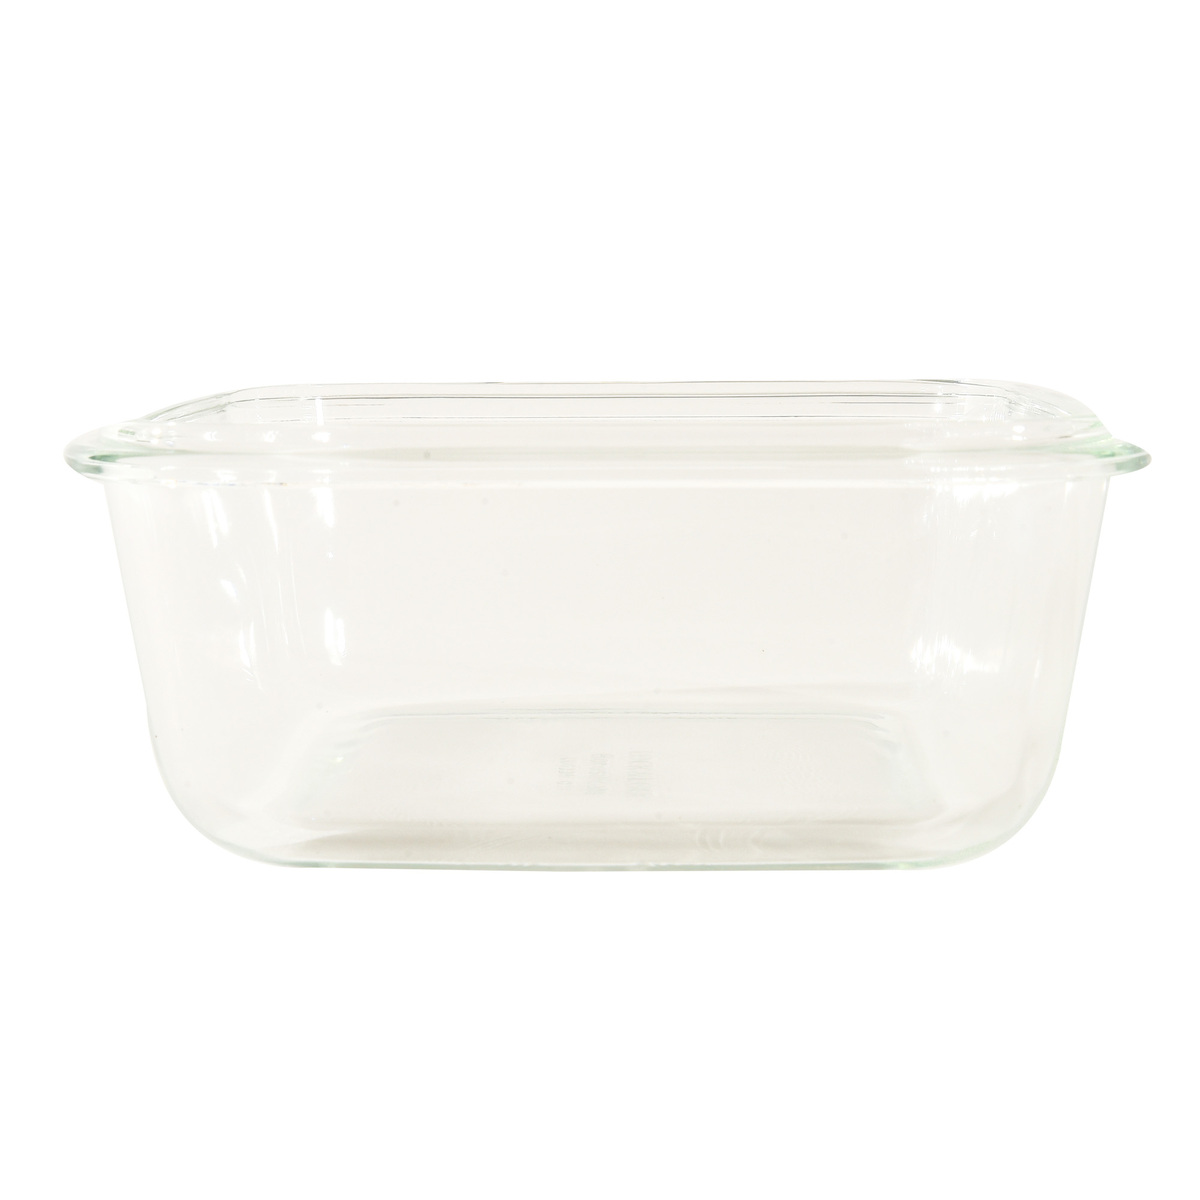 Lock & Lock Square Glass Container with Lid, 930 ml, Clear, LLG226